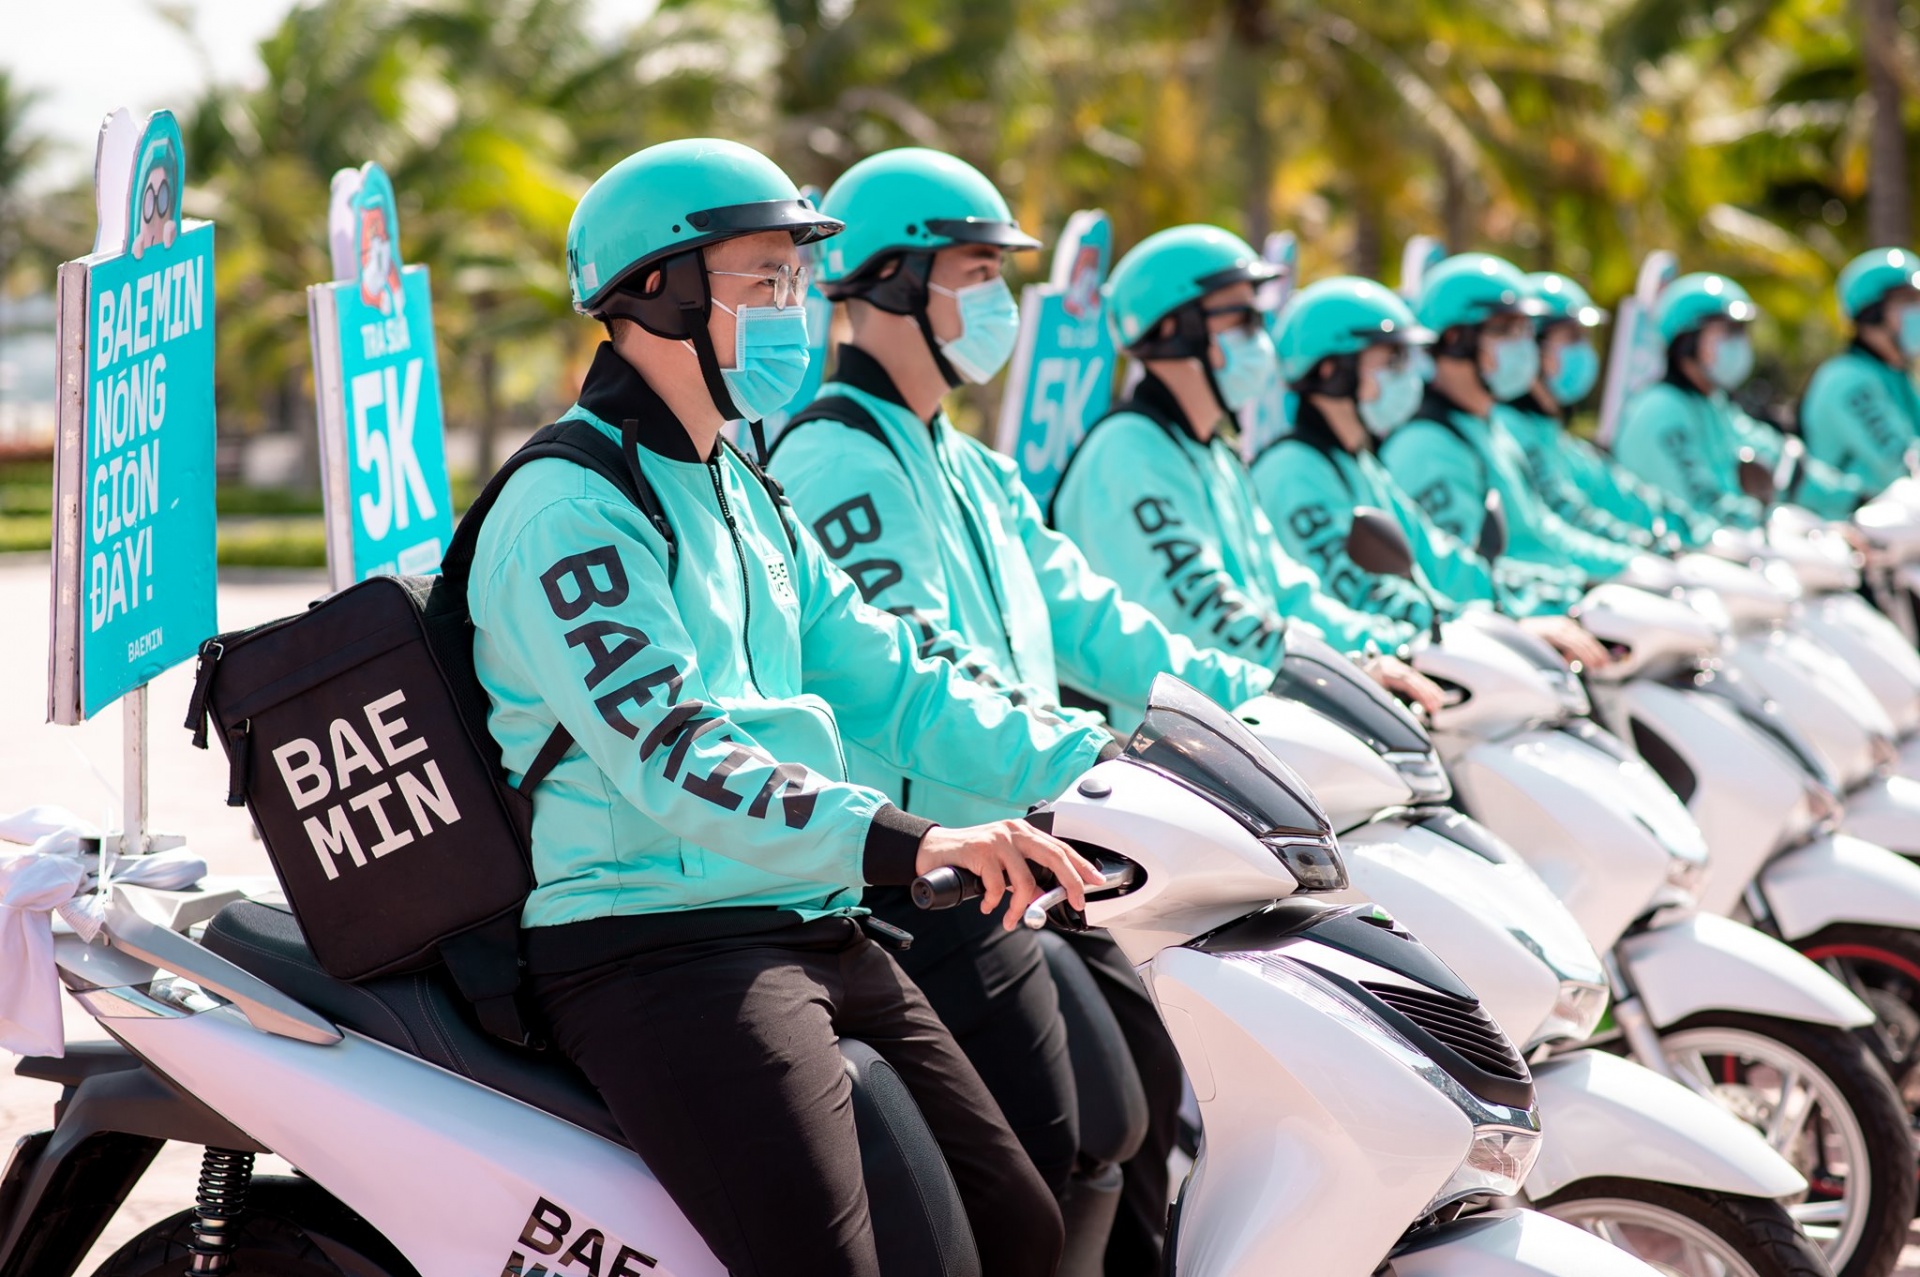 BAEMIN continues its journey to win Vietnamese consumers' hearts